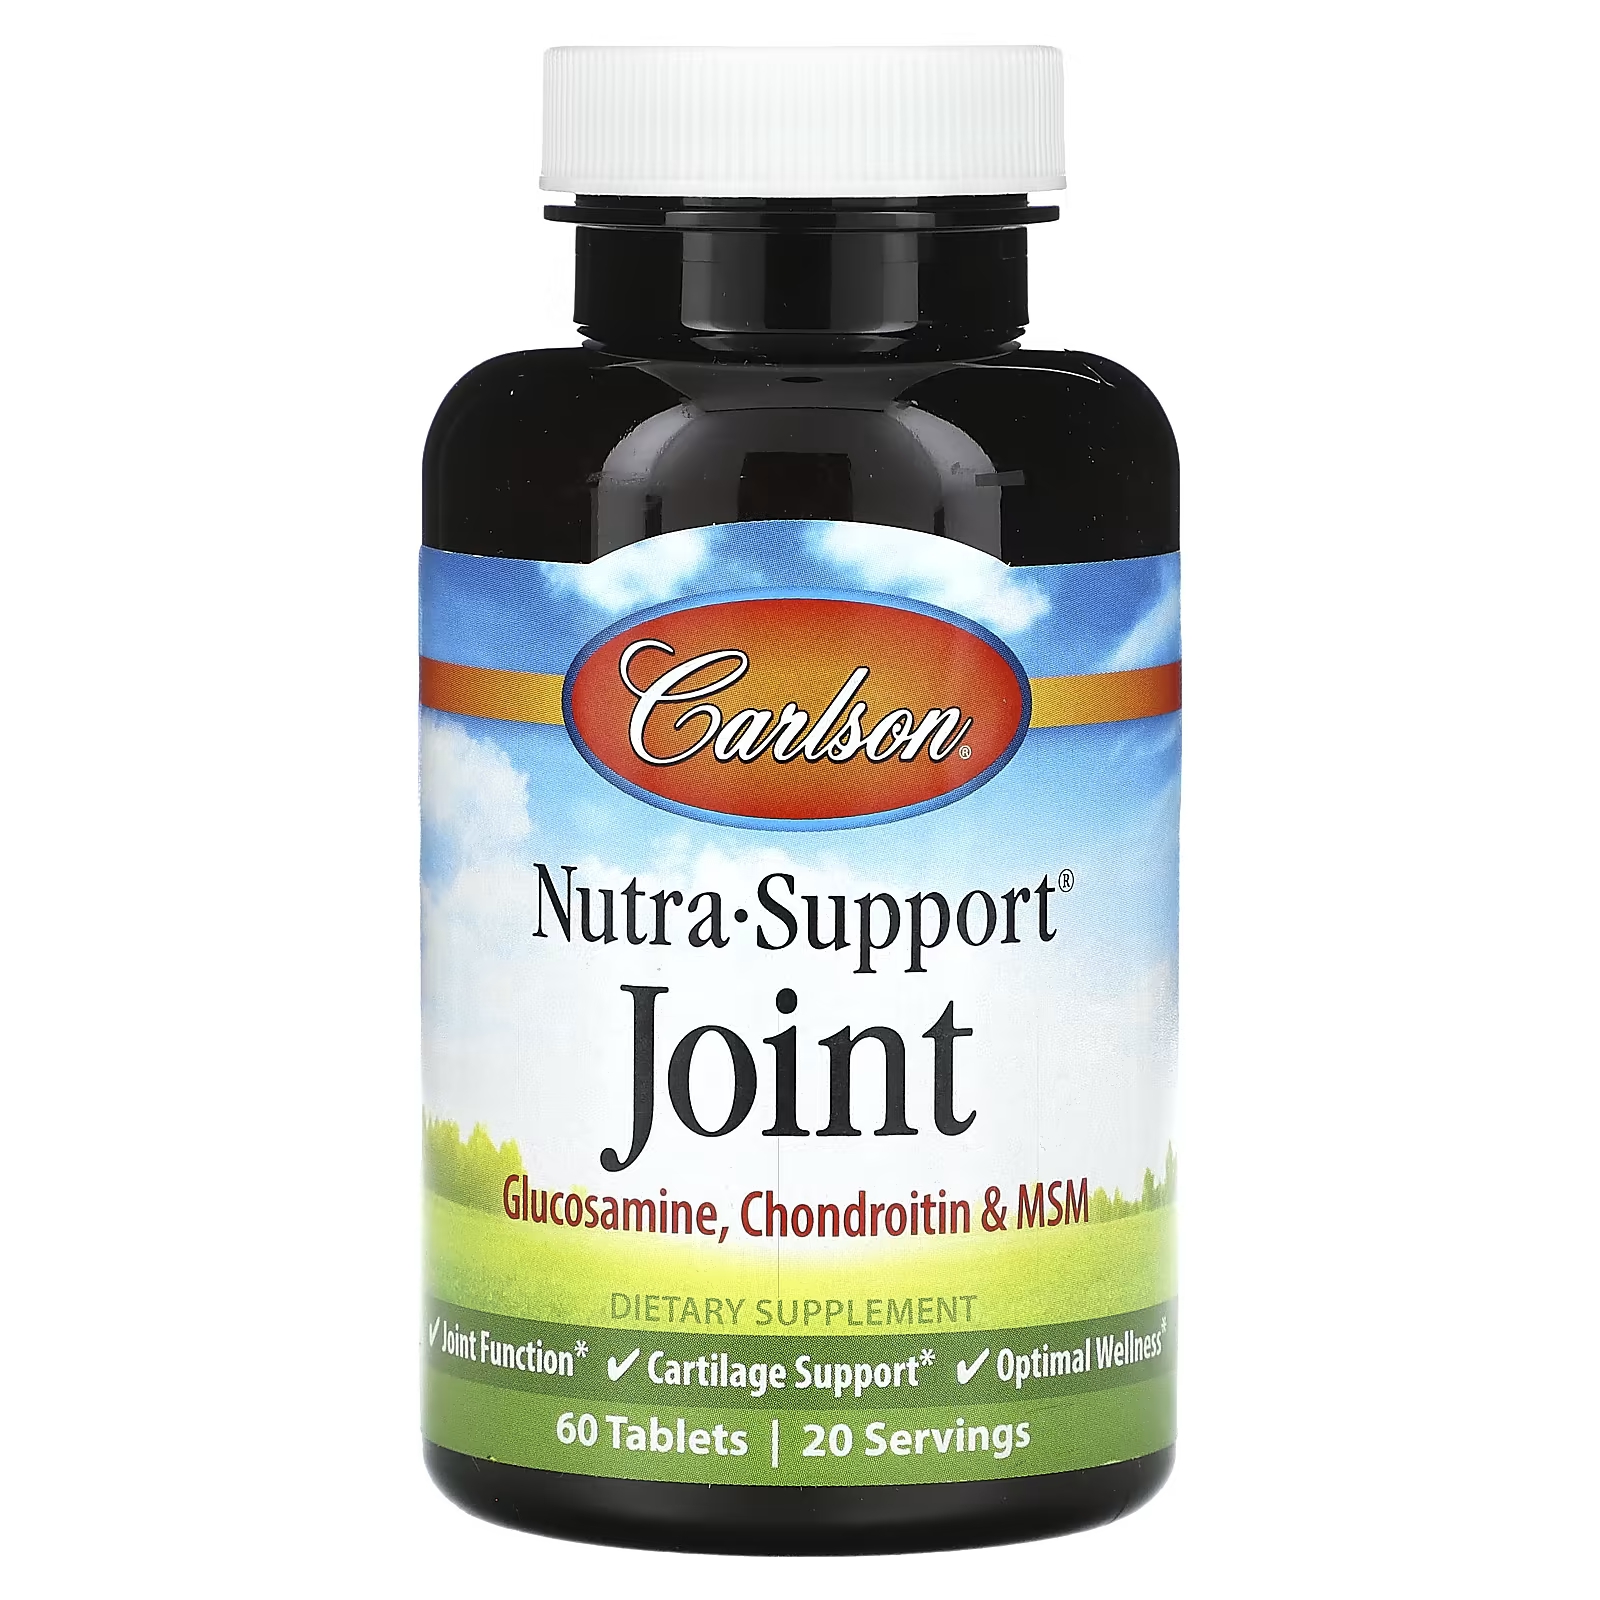 Пищевая добавка Carlson Nutra-Support Joint, 60 таблеток carlson nutra support joint 180 tabs